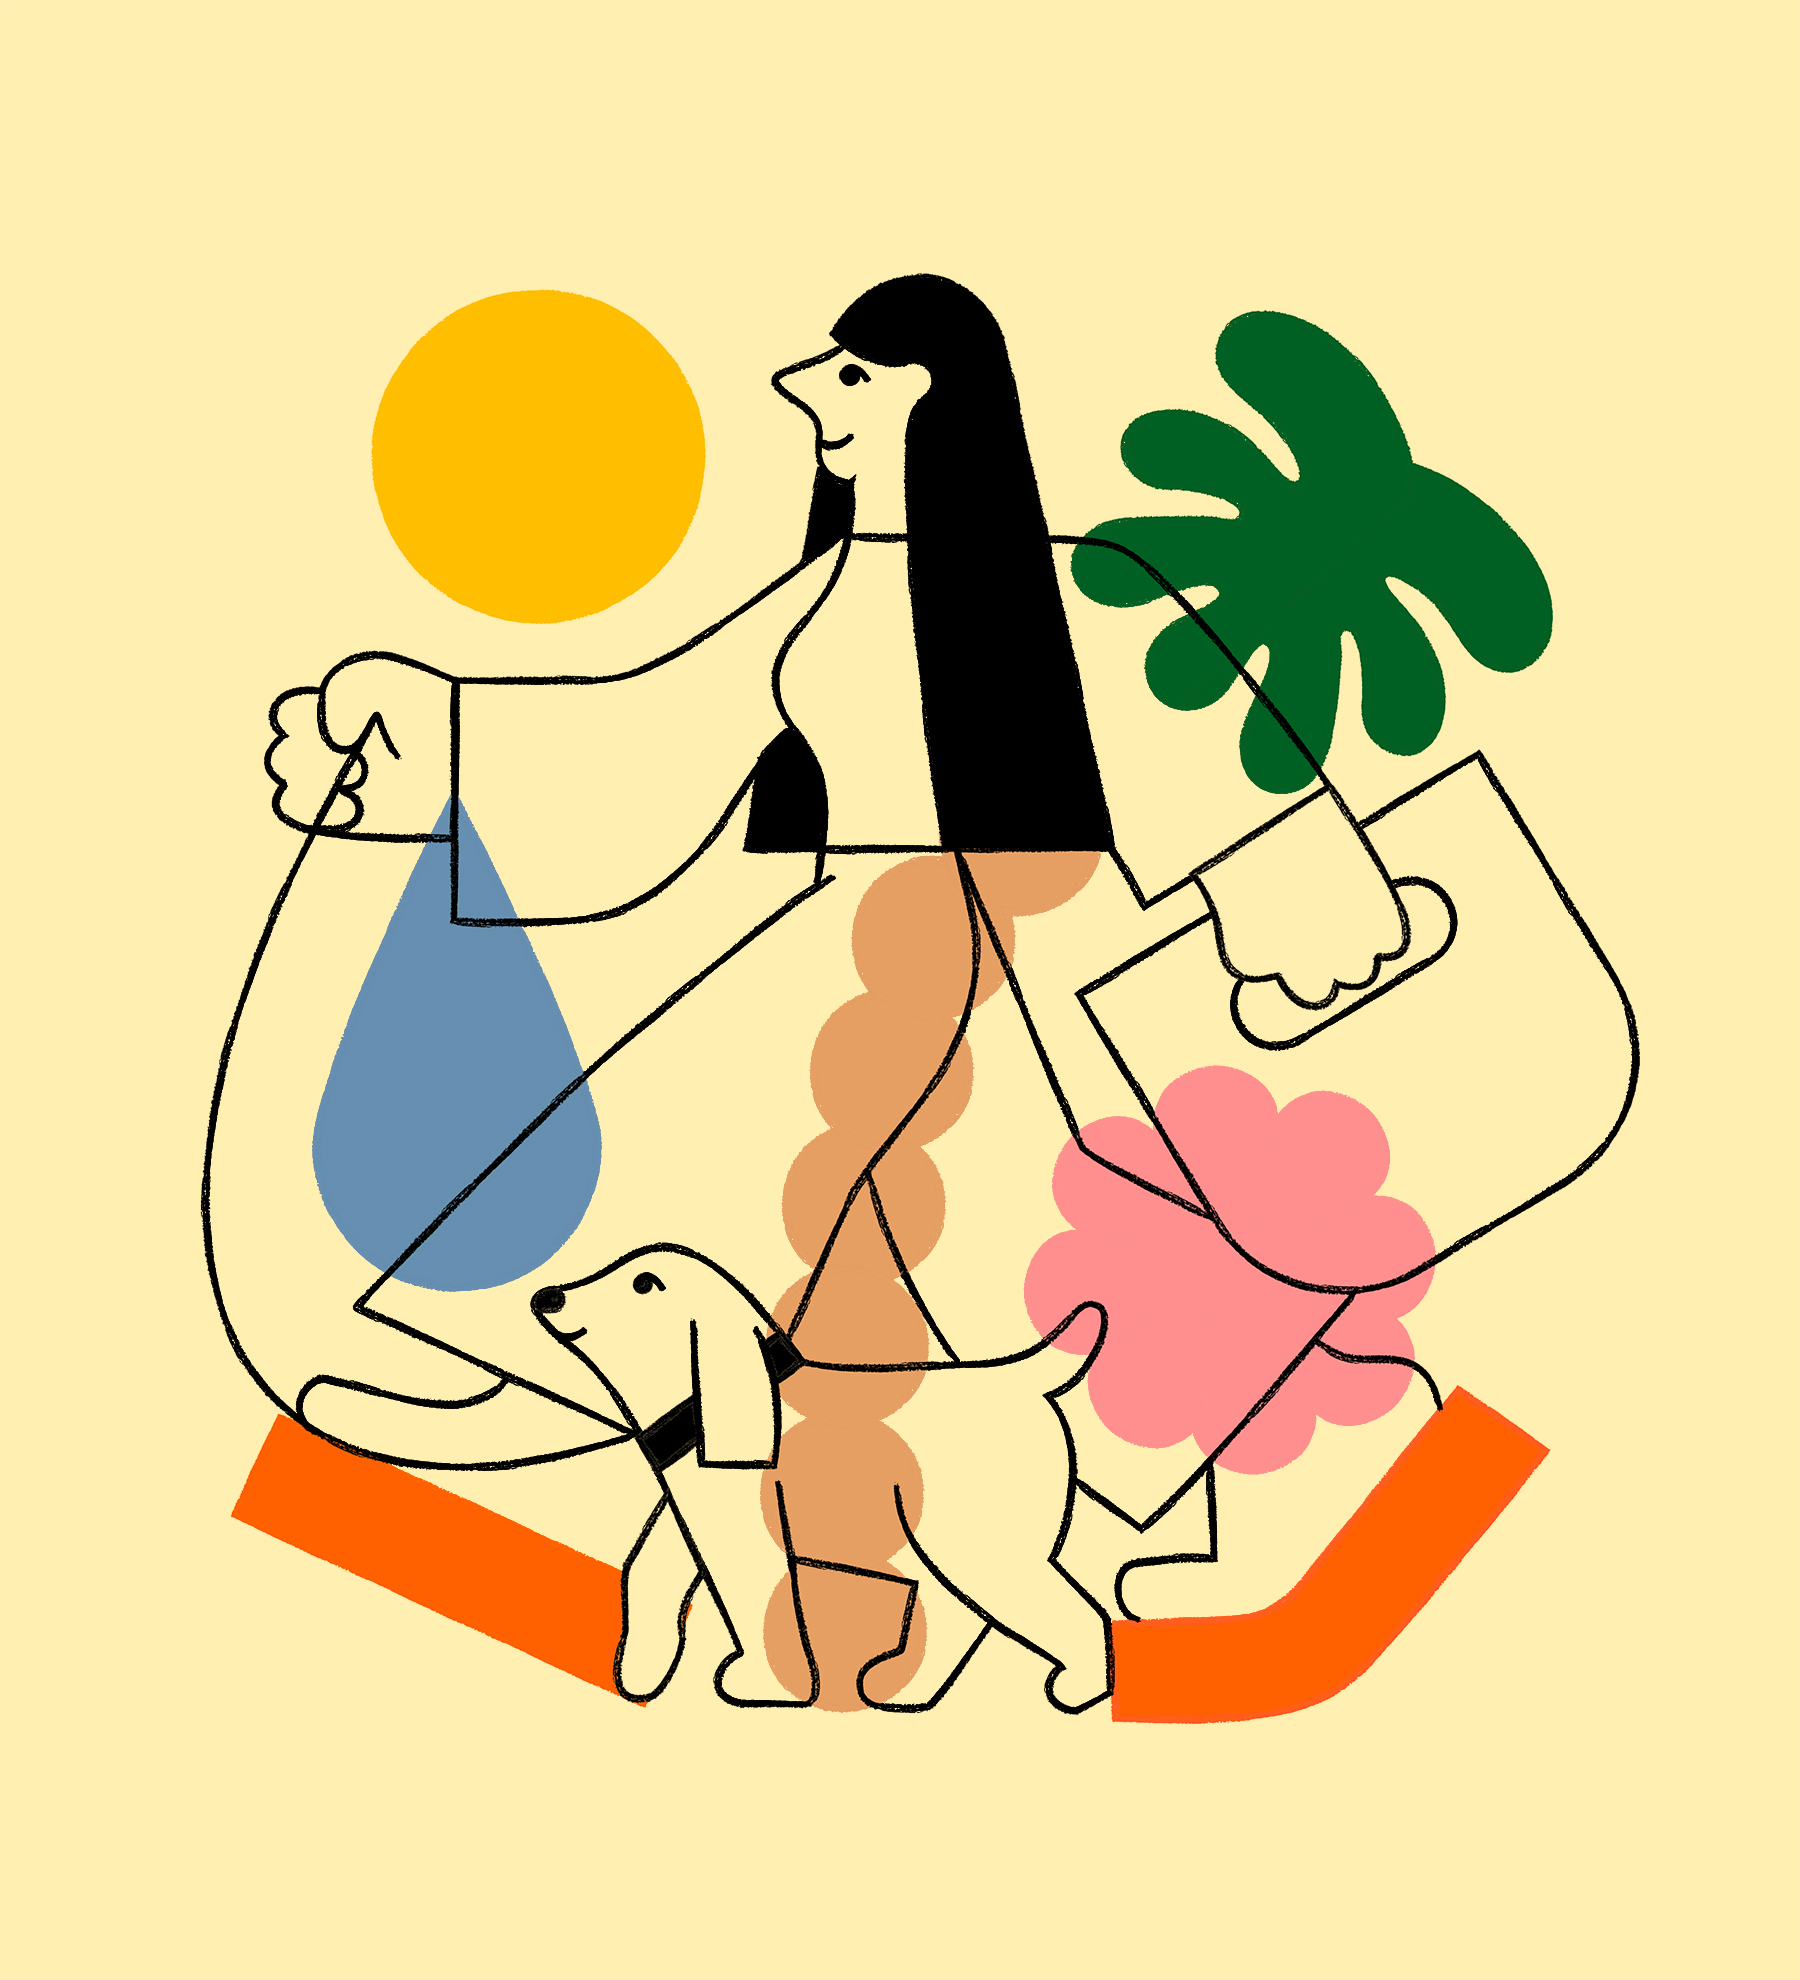 A simple line illustration of a female walking a dog.